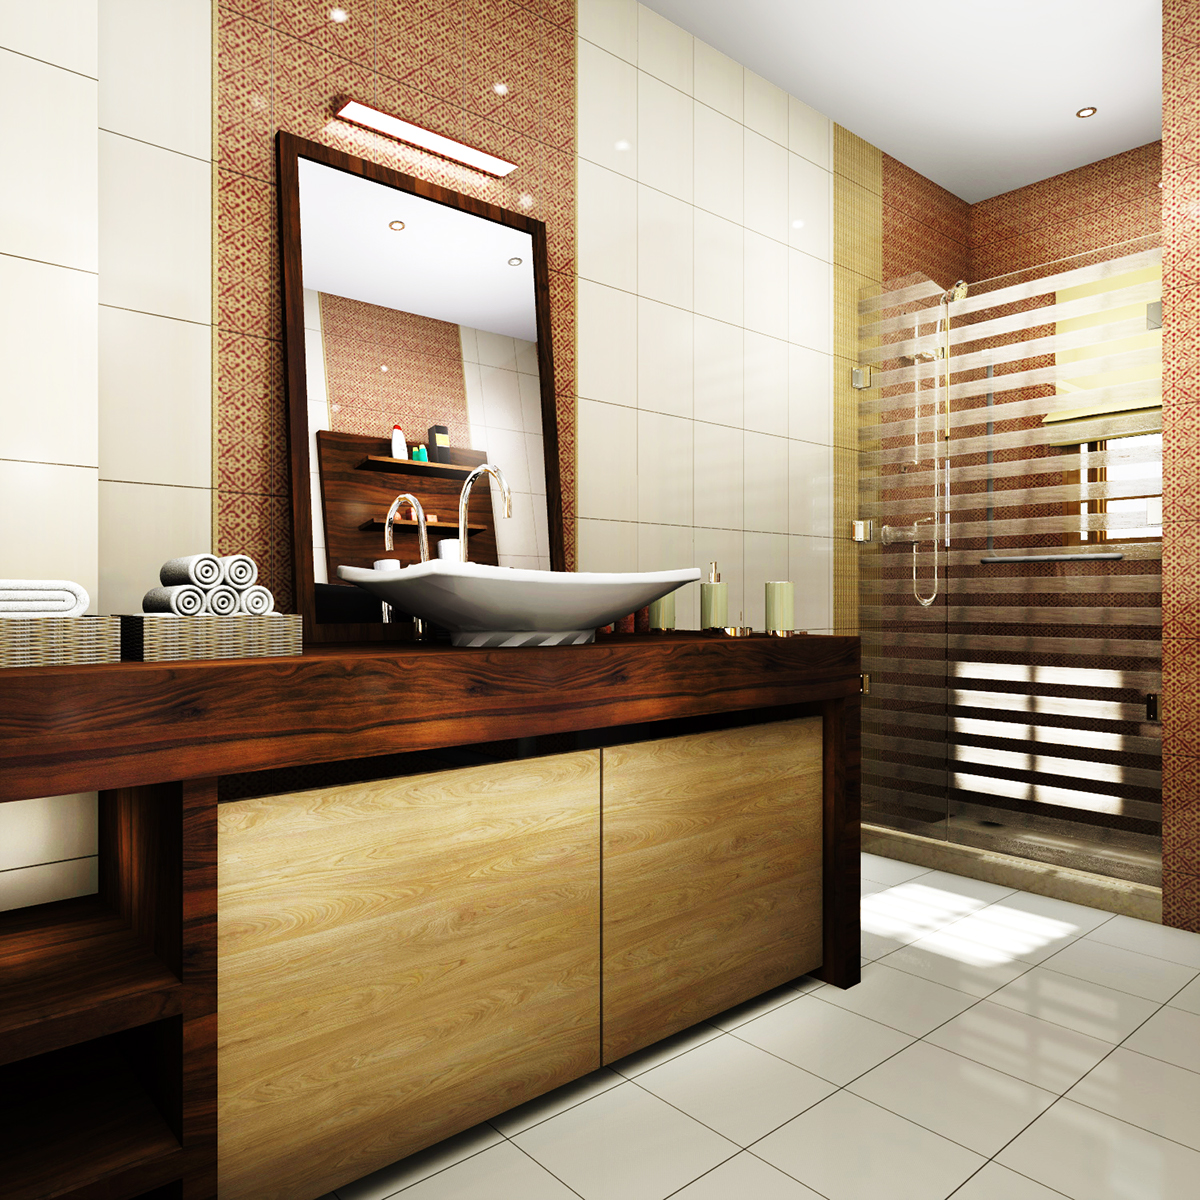 Interior bathroom kitchen changing room home spaces wood warm modern neo-classic